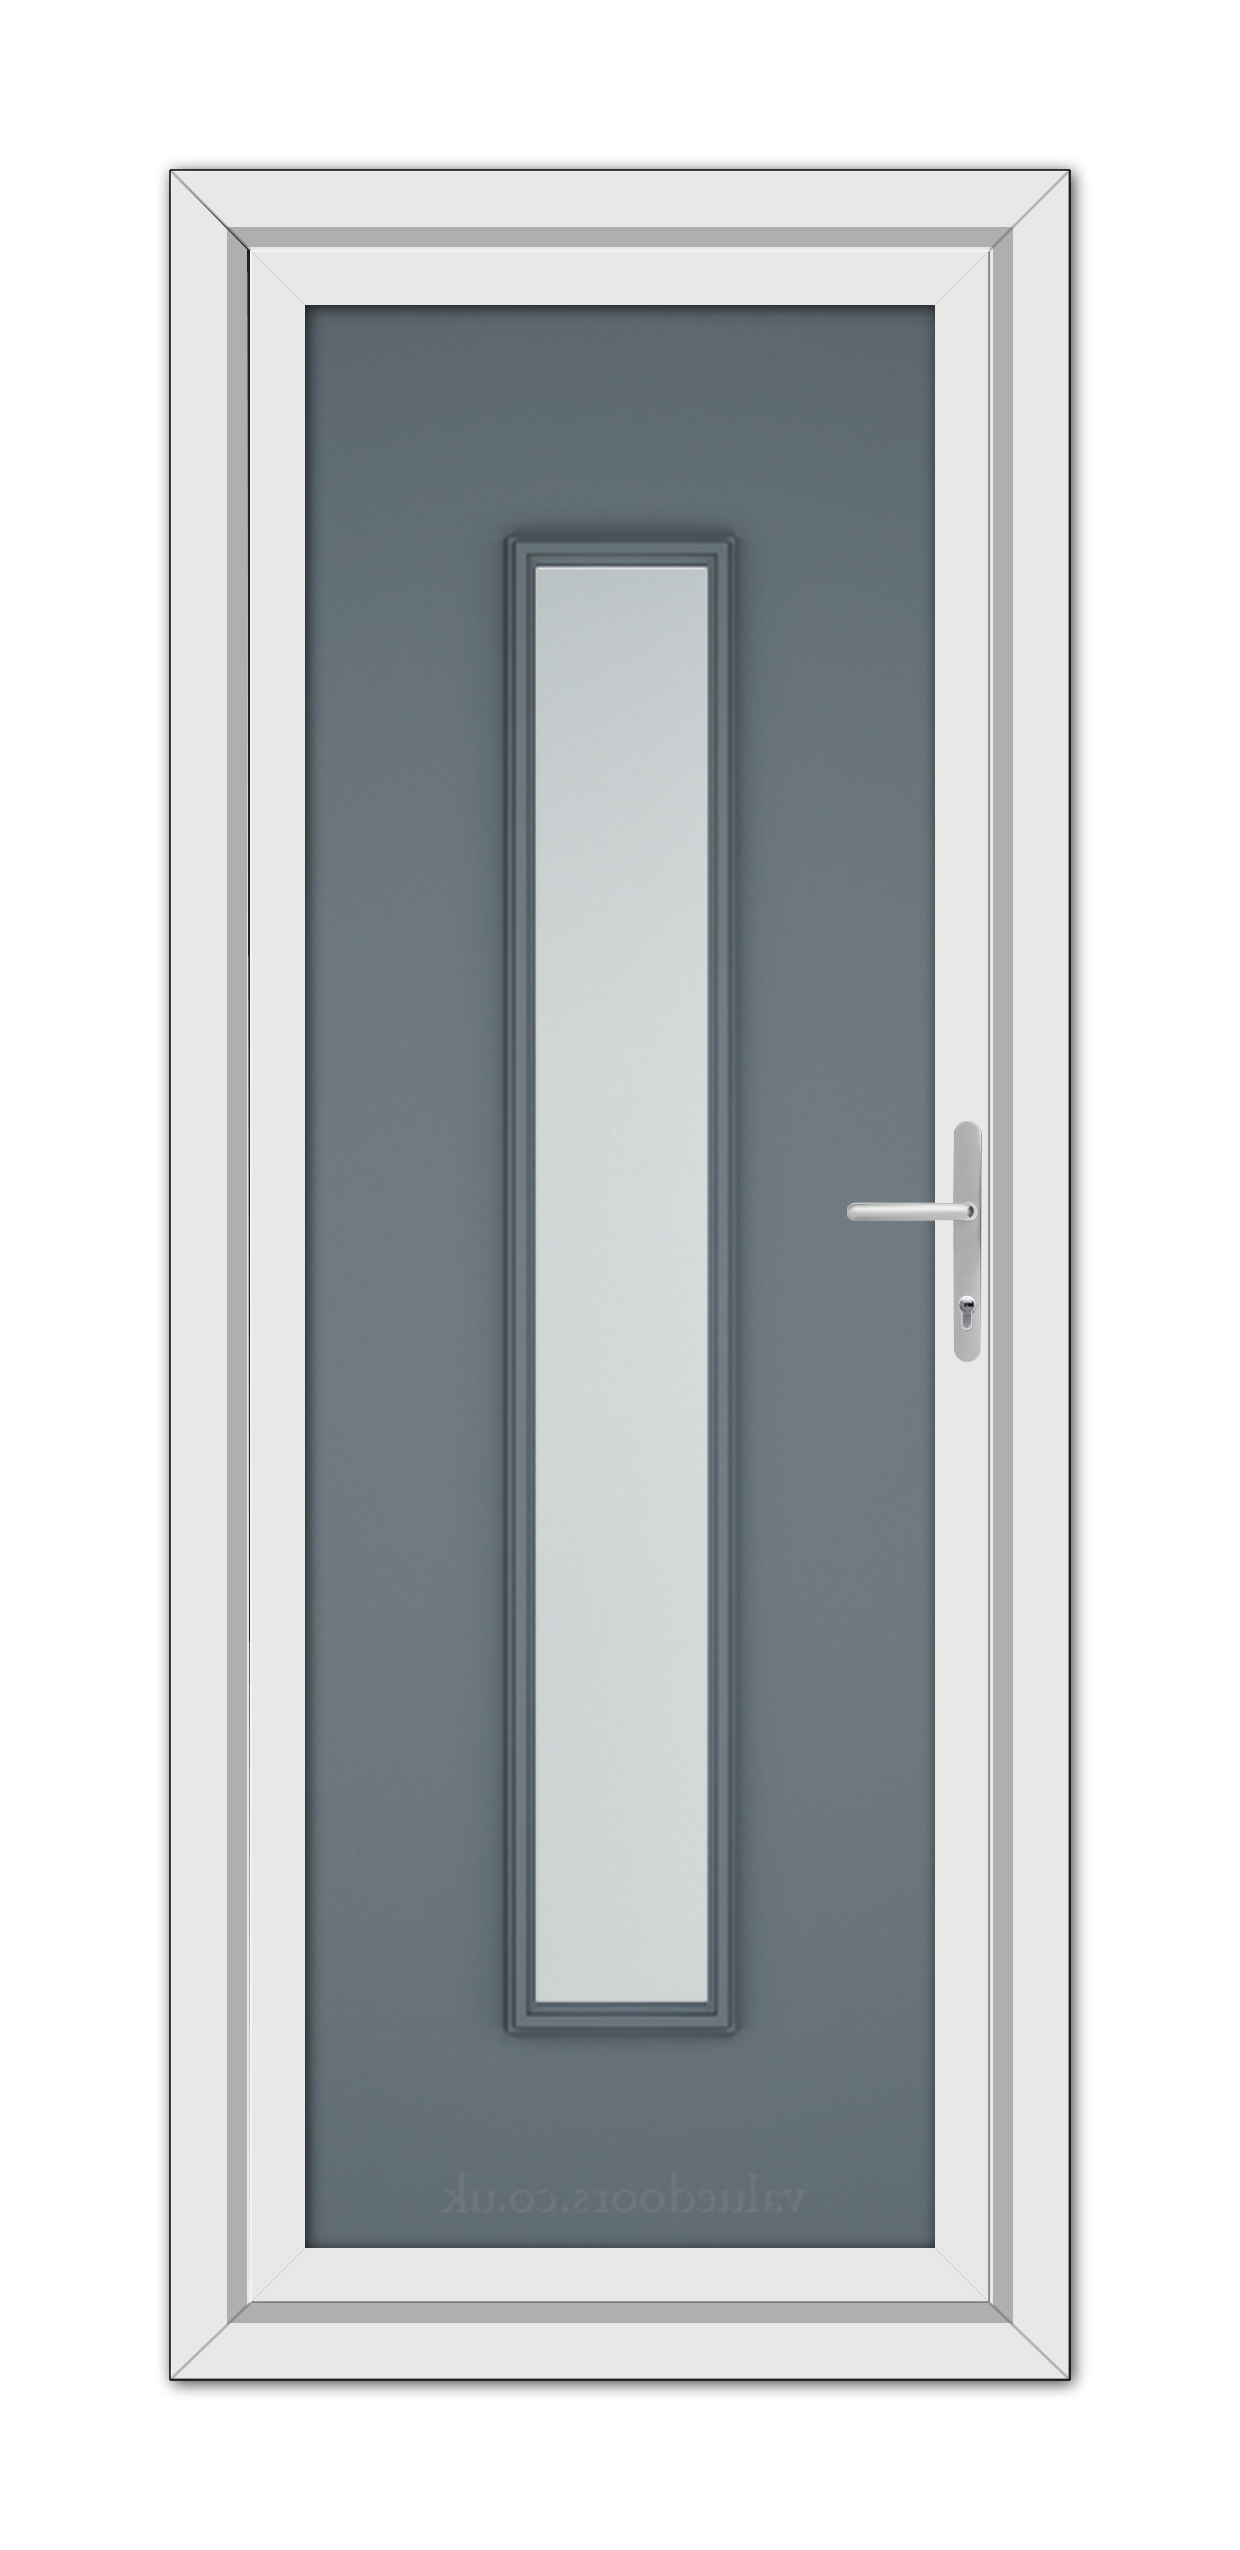 A Slate Grey Rome uPVC door with a glass panel.